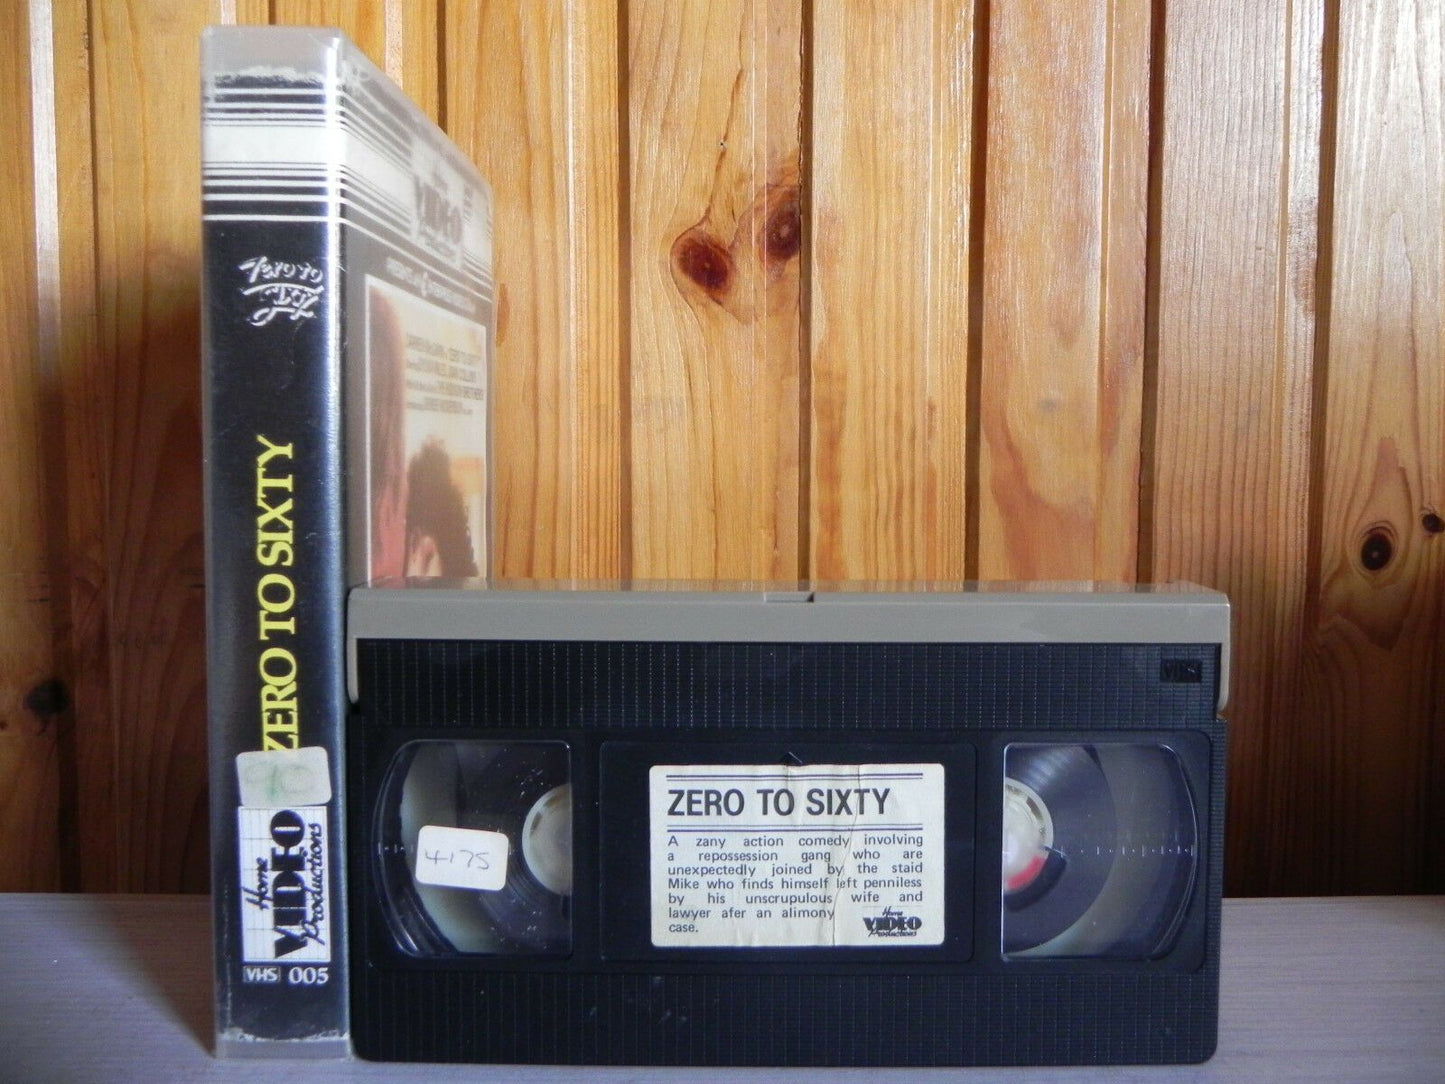 Zero To Sixty - Home Video Productions - Action Comedy - Joan Collins - Pal VHS-